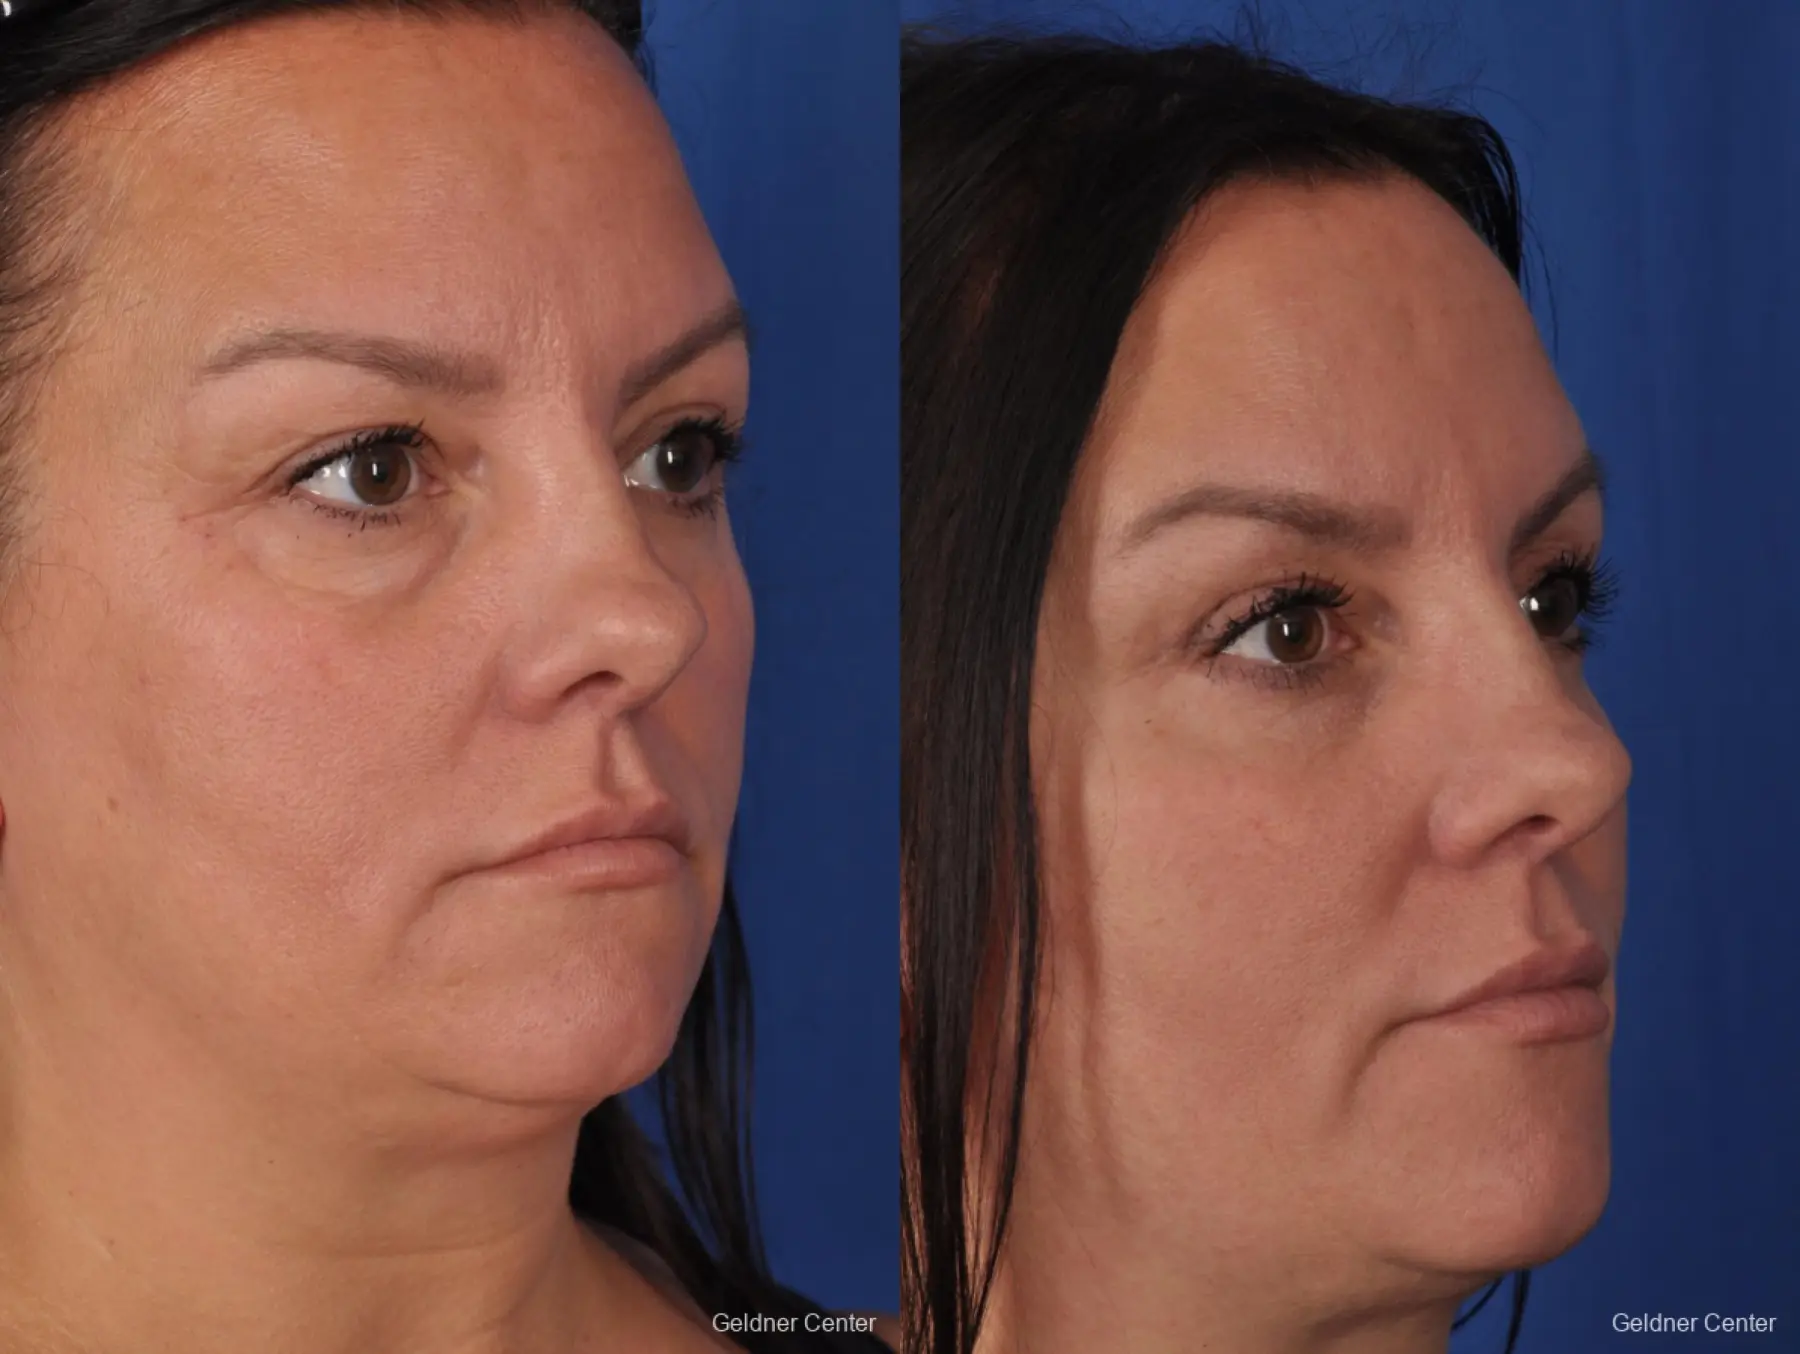 Blepharoplasty: Patient 1 - Before and After 5